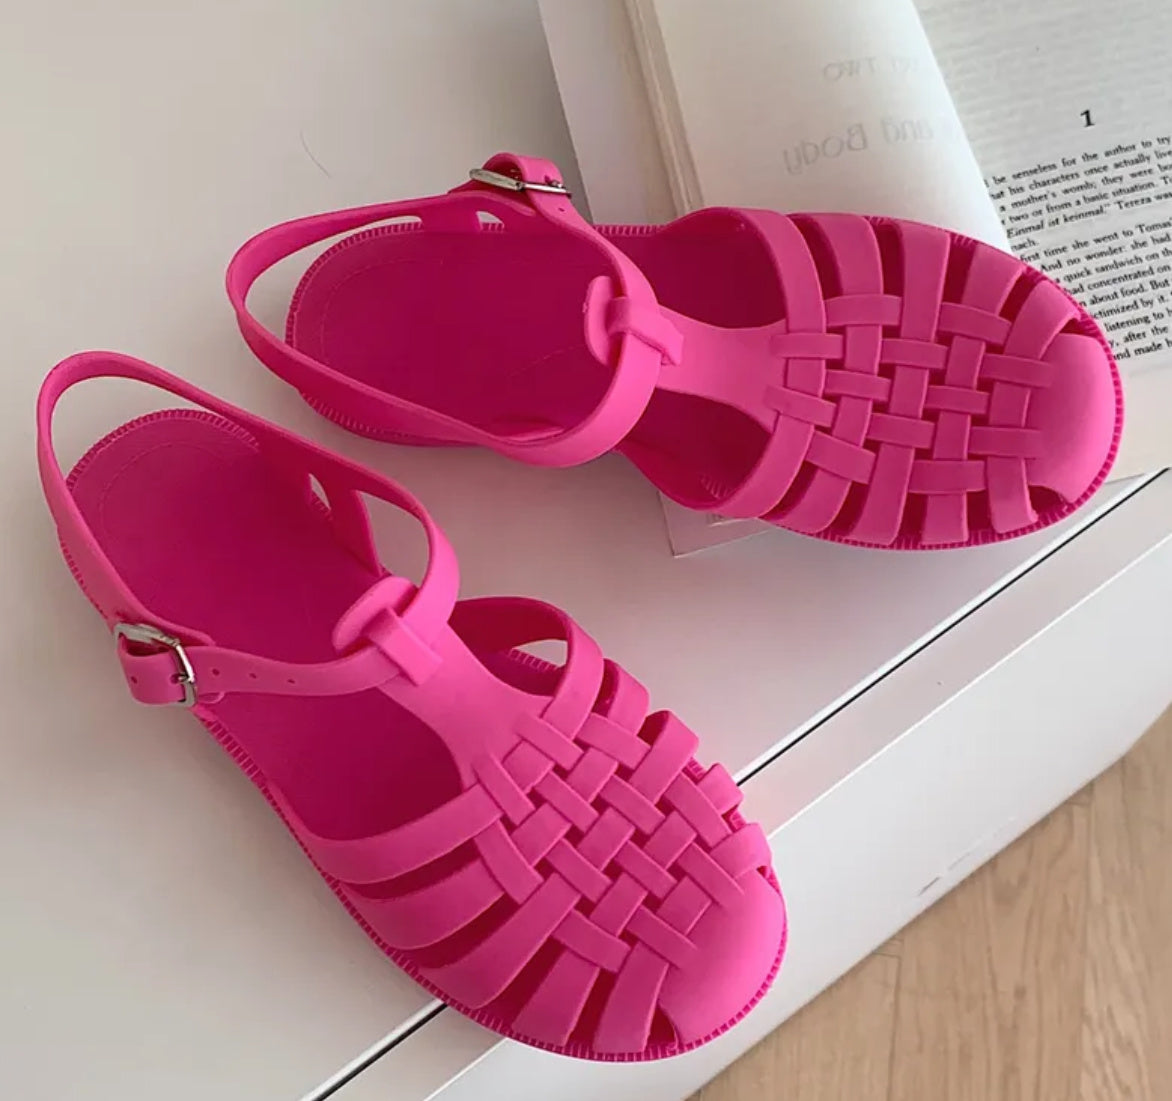 Jelly- the Rubber Huarache Sandals 6 Colors (including PINK!)